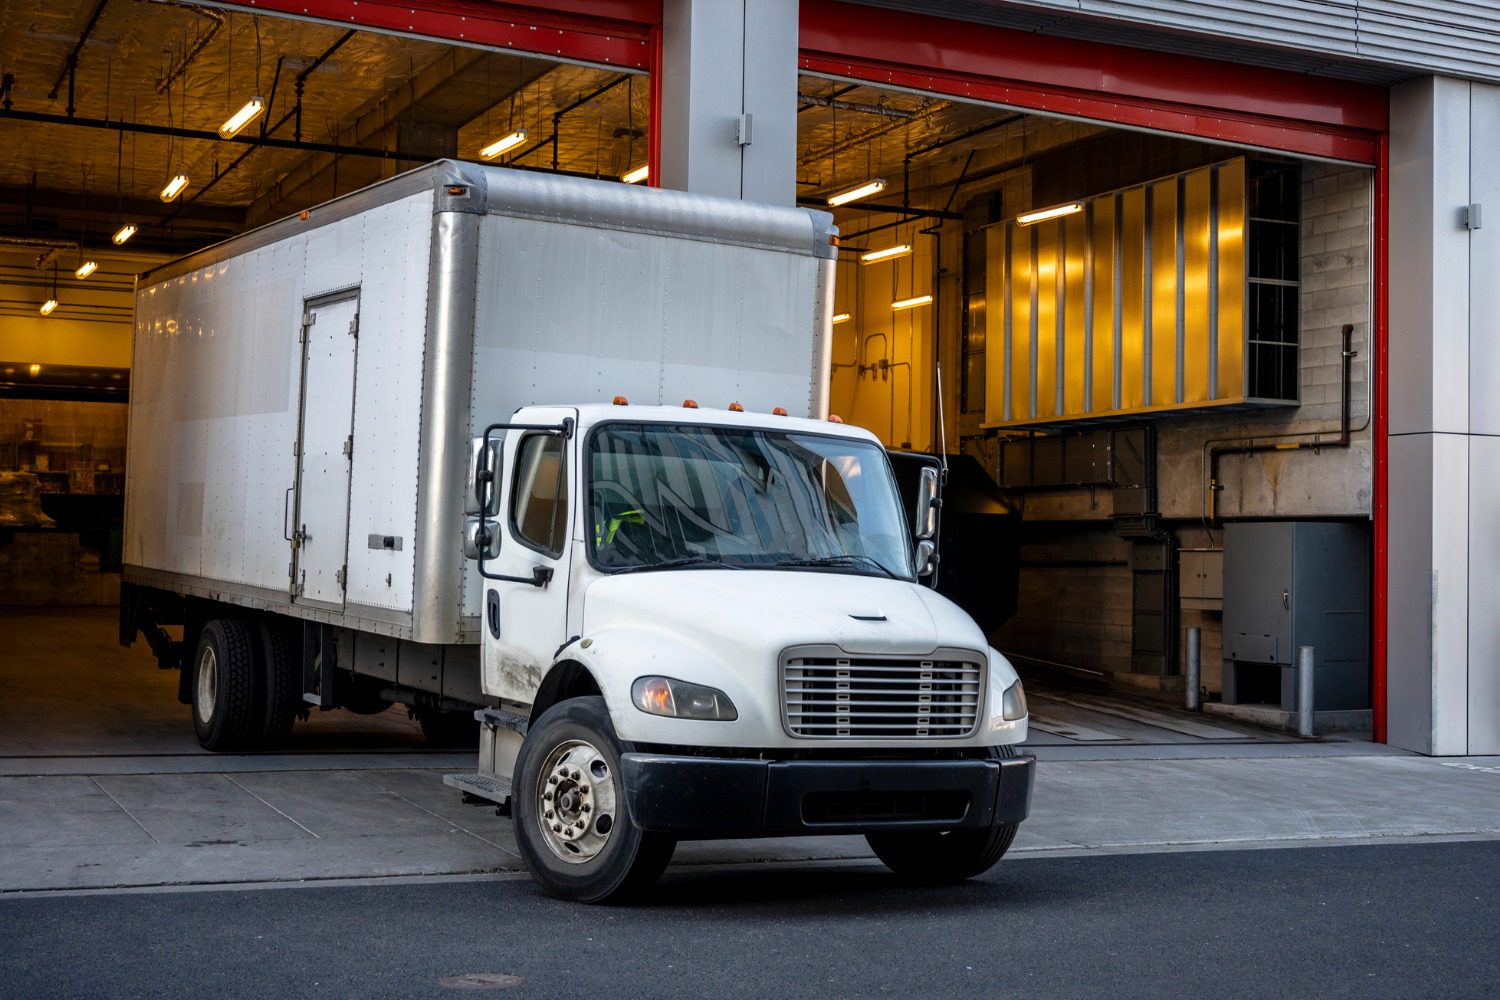 How Much Is Box Truck Insurance?